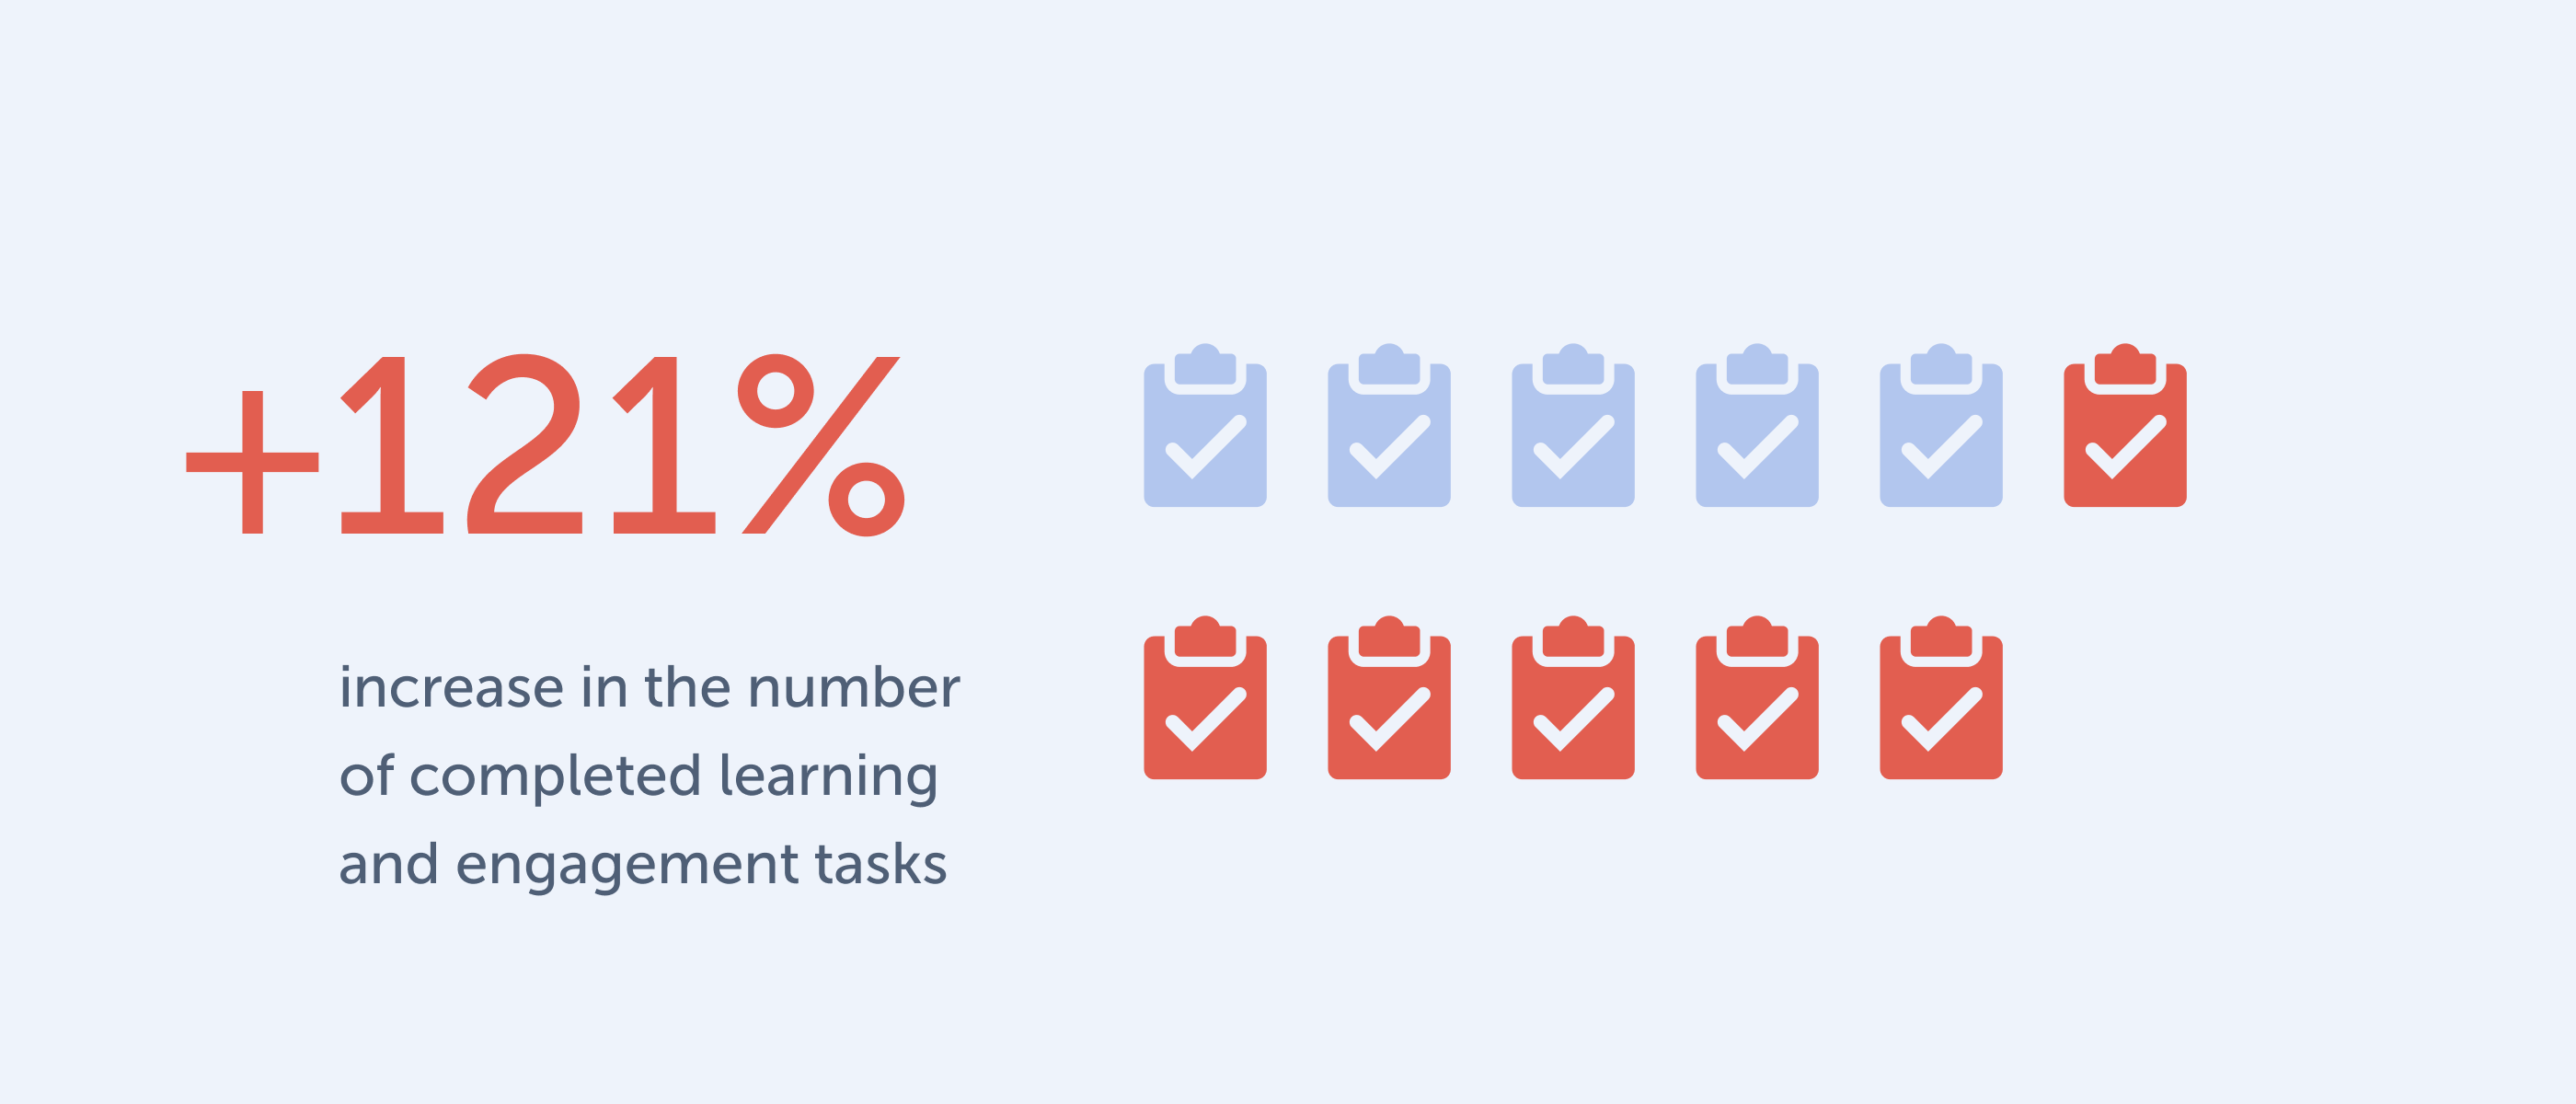 infographic showing an increase in the number of completed learning and engagement tasks